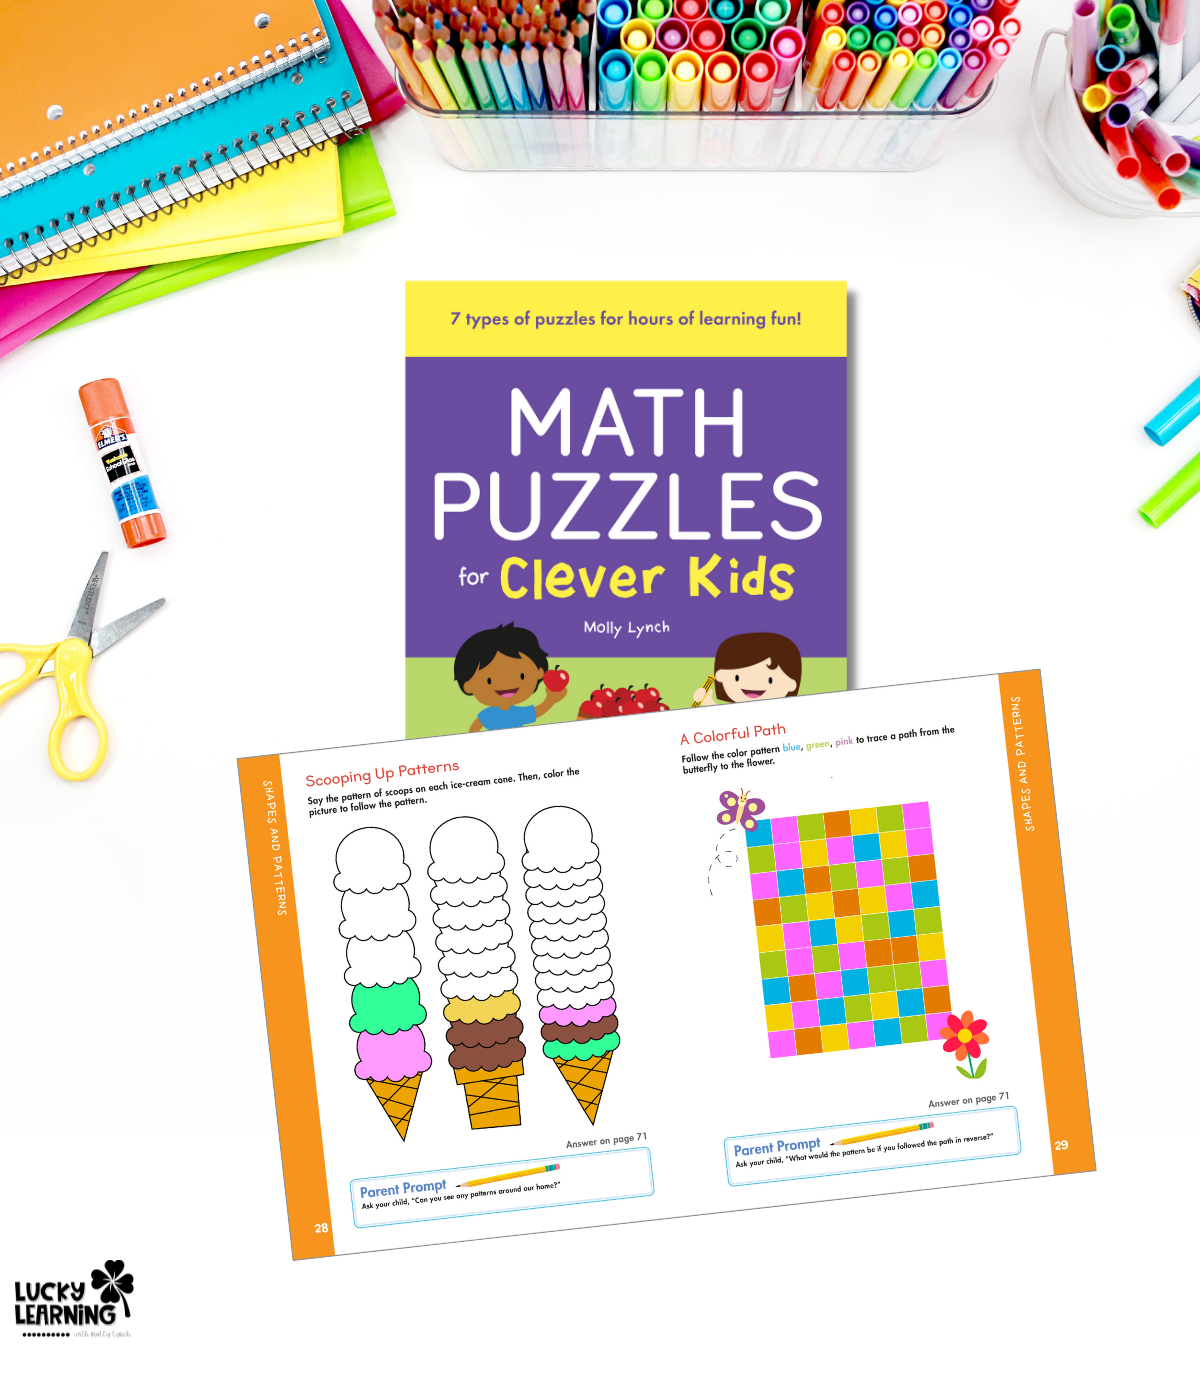 math puzzles with an ice cream theme | Lucky Learning with Molly Lynch